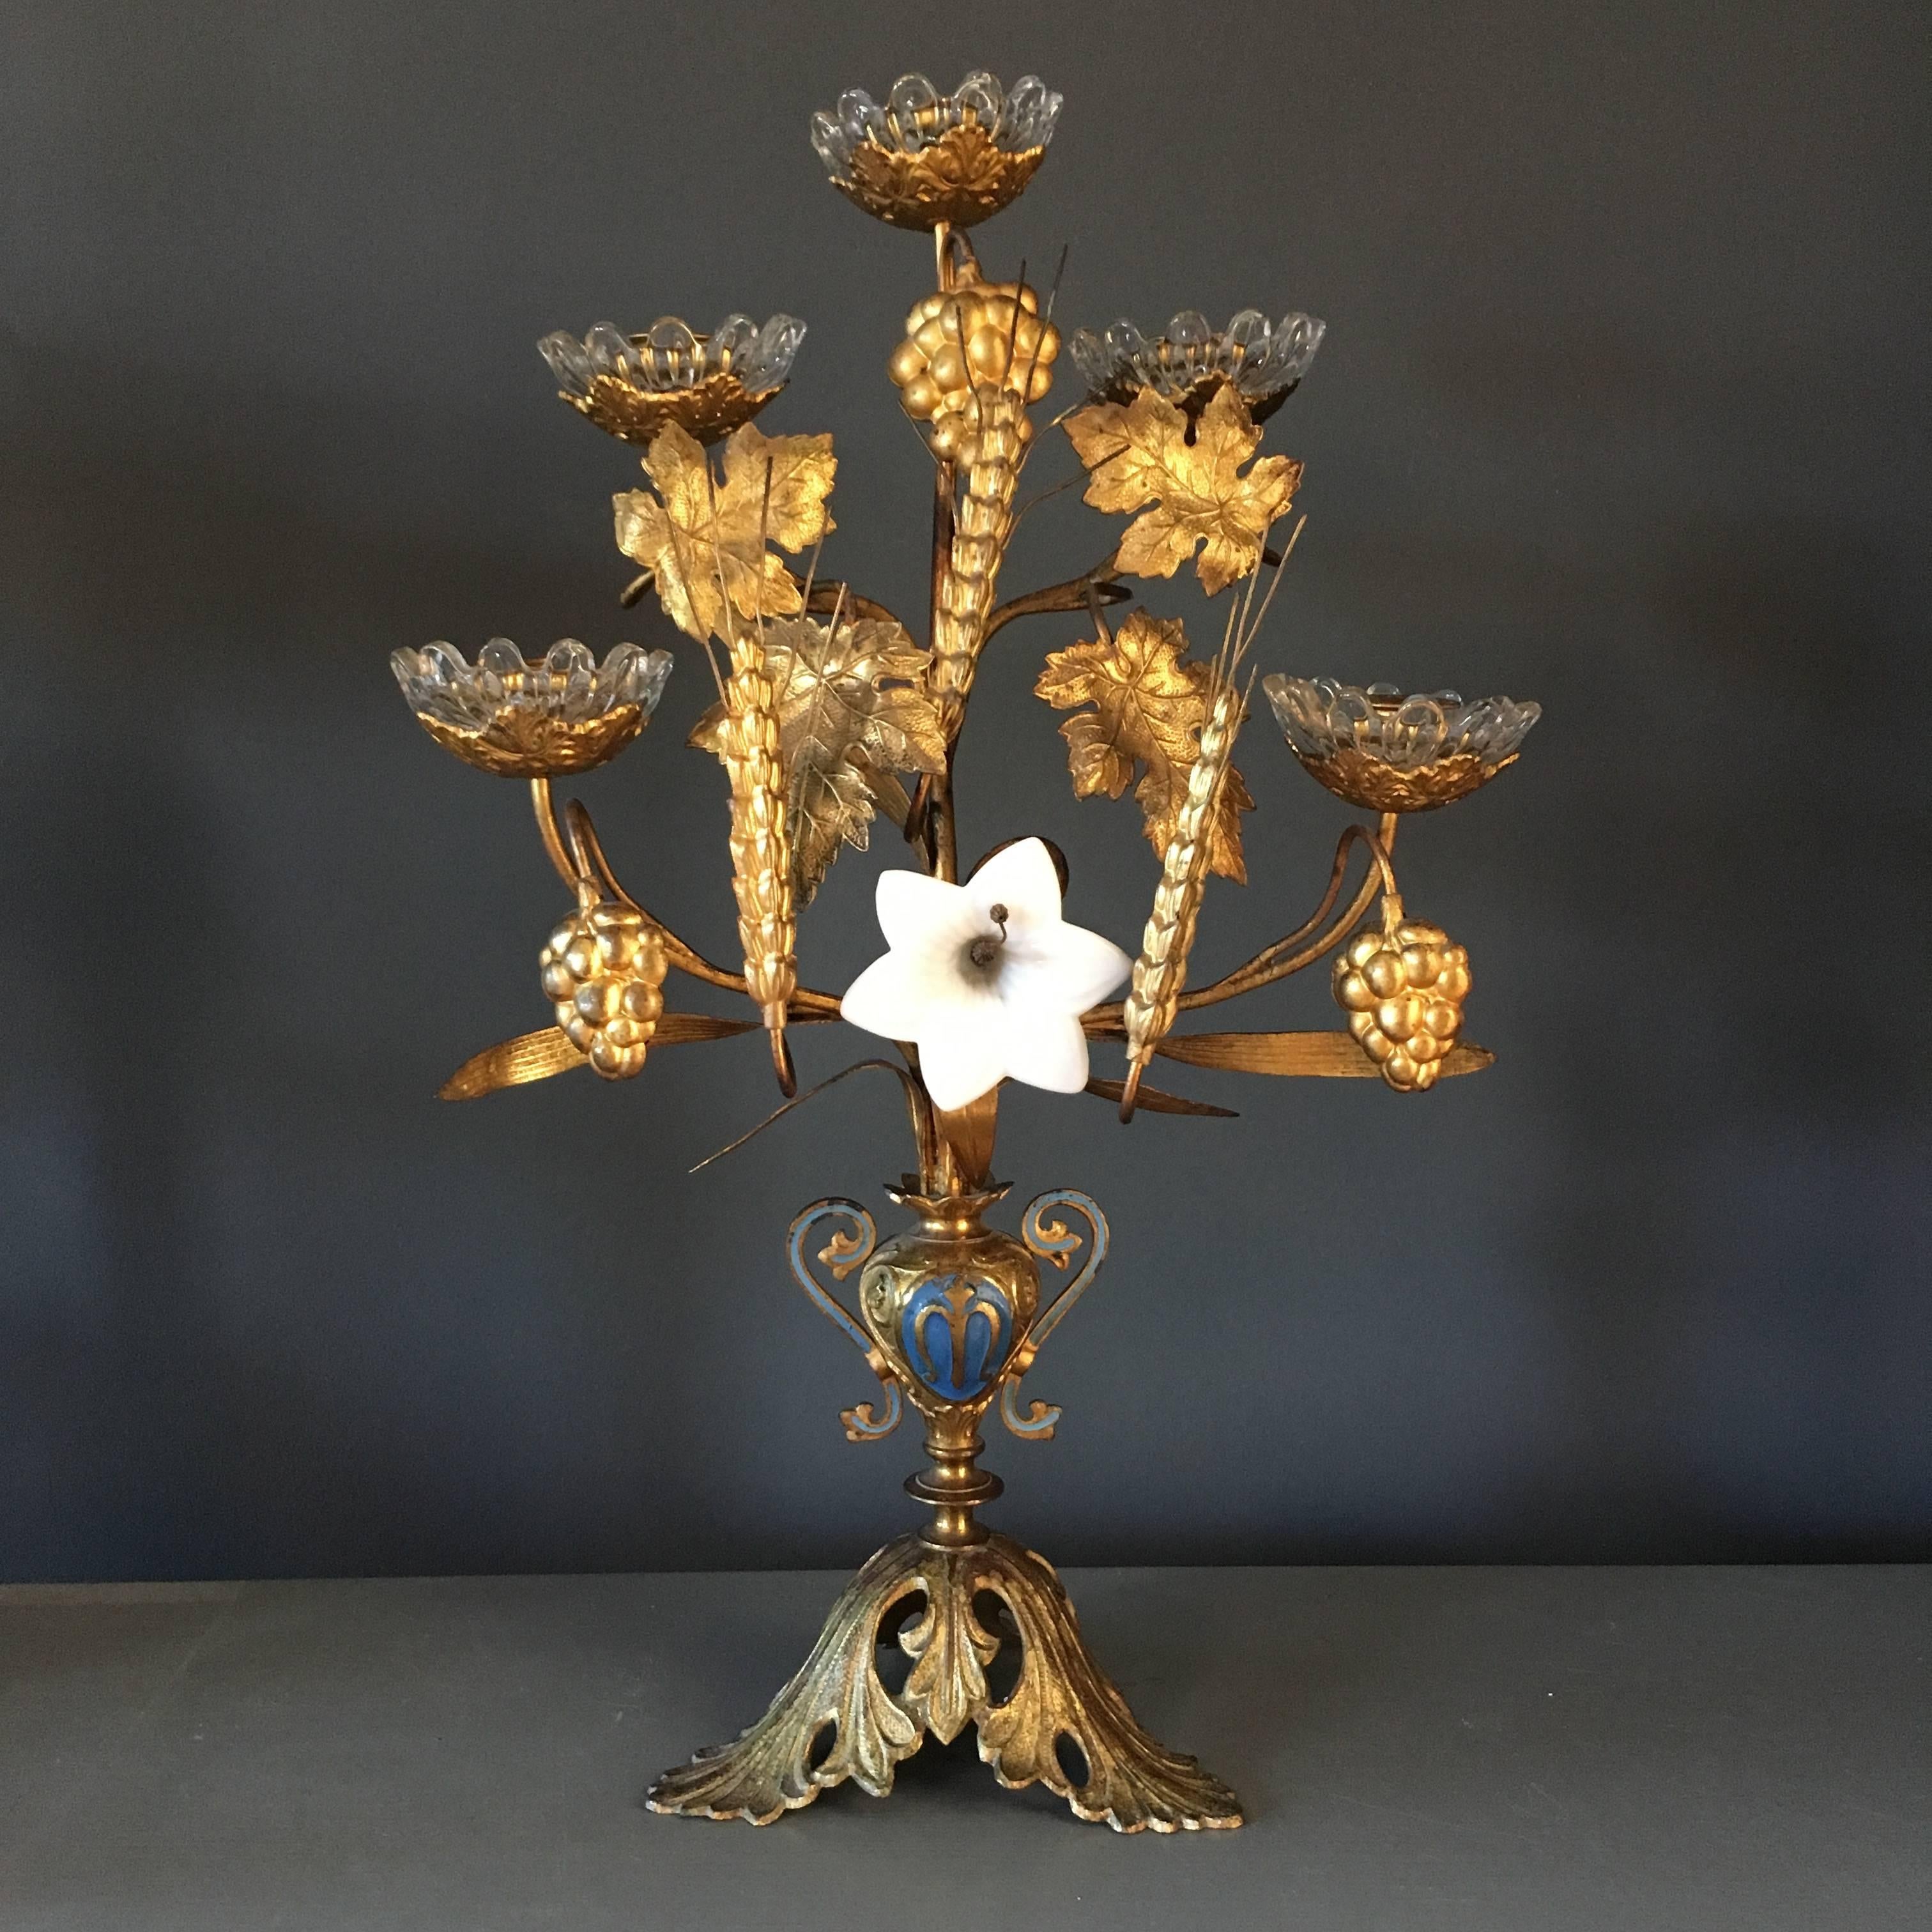 Late 19th century pair of French church candelabra 

Beautiful decorative details of wheat sheaf and leaves, grapes and ivy

Original white milk glass flowers

Original glass candleholder surrounds

Each candelabra holds five candles

Blue